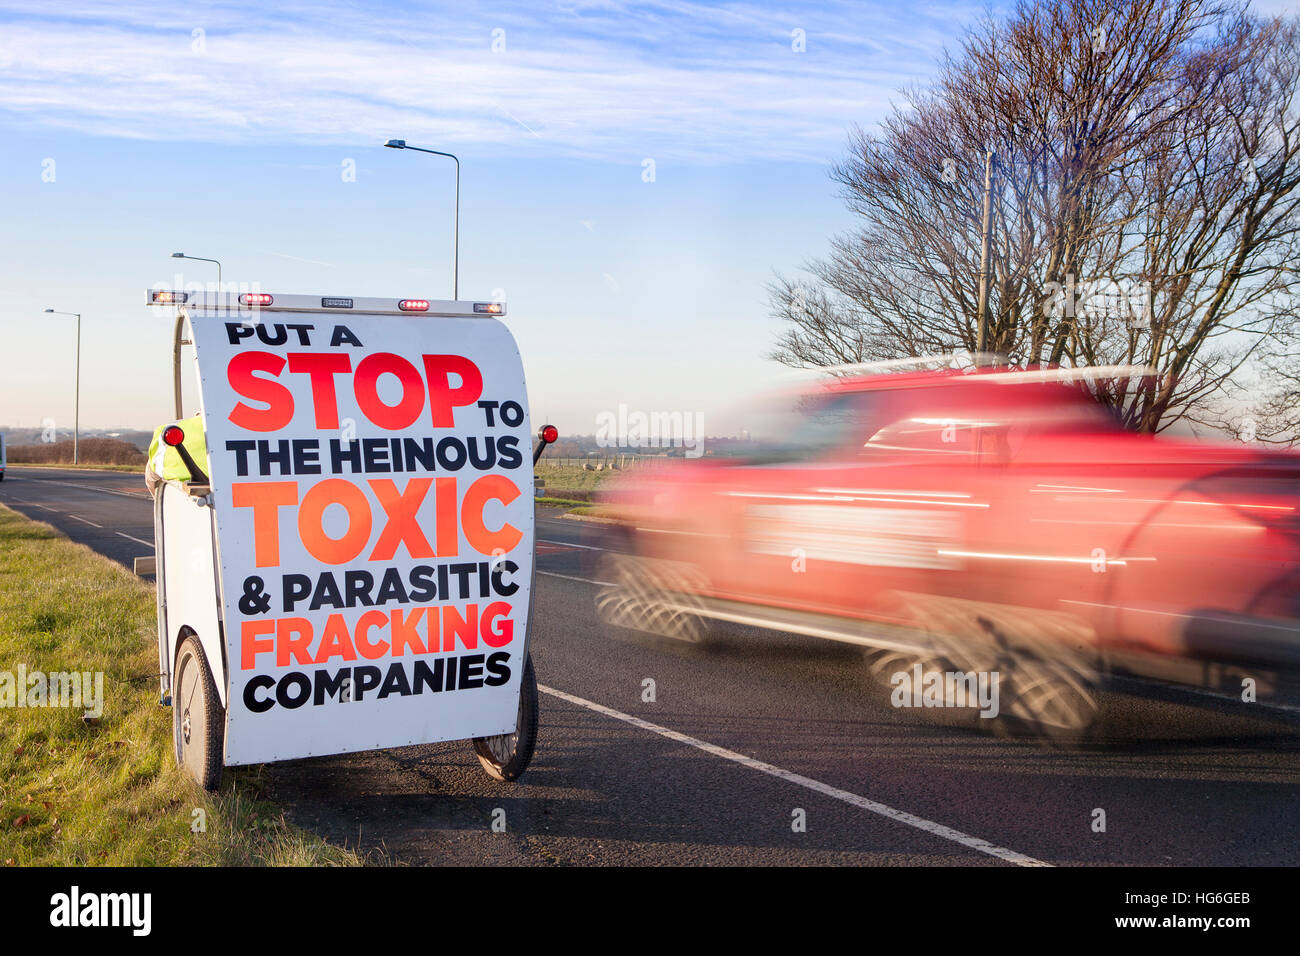 Traffic passing anti-fracking signs in Little Plumpton, Lancashire, UK. 5th Jan 2017. Security moves into the heavily protected area of Little Plumpton, a site designated for the installation of four wells for shale gas extraction by the notorious 'Fracking'. Protesters claim this fracturing process is linked to water pollution, ill health and earthquakes. This controversial Cuadrilla 'Fracking' site was approved on appeal by Communities Secretary Sajid Javid in early December 2016, overturning Lancashire County Councils previous refusal. © Cernan Elias/Alamy Live News Stock Photo